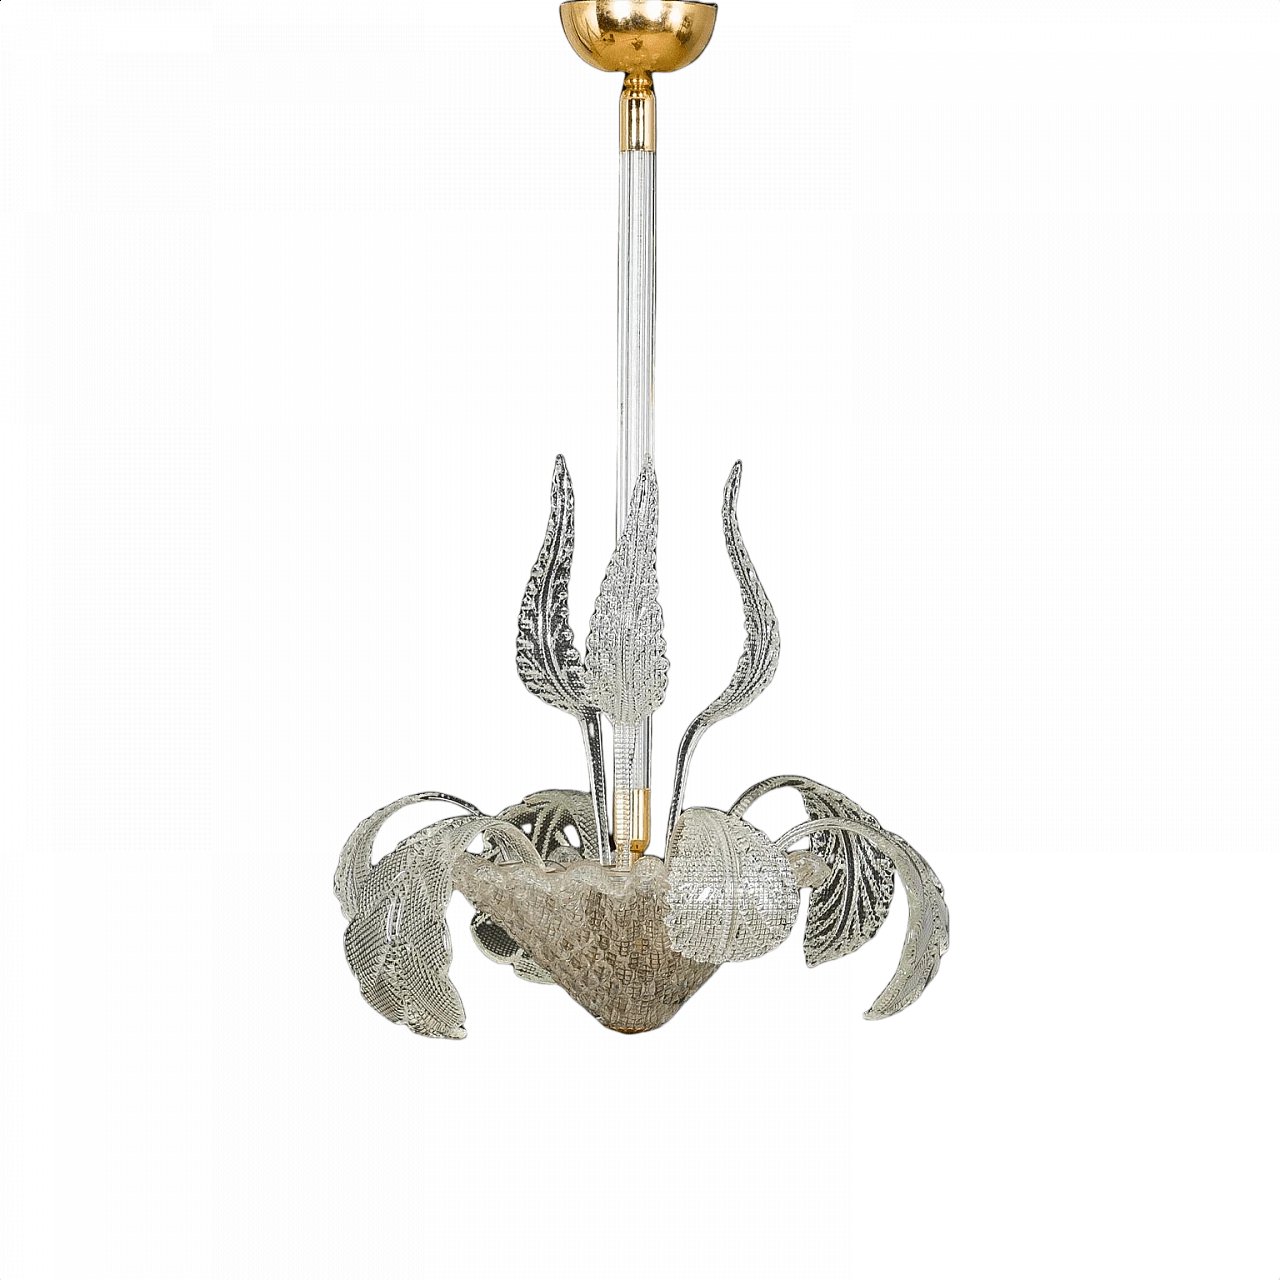 Classic style Murano glass chandelier by Barovier and Toso, 1950s 1364985